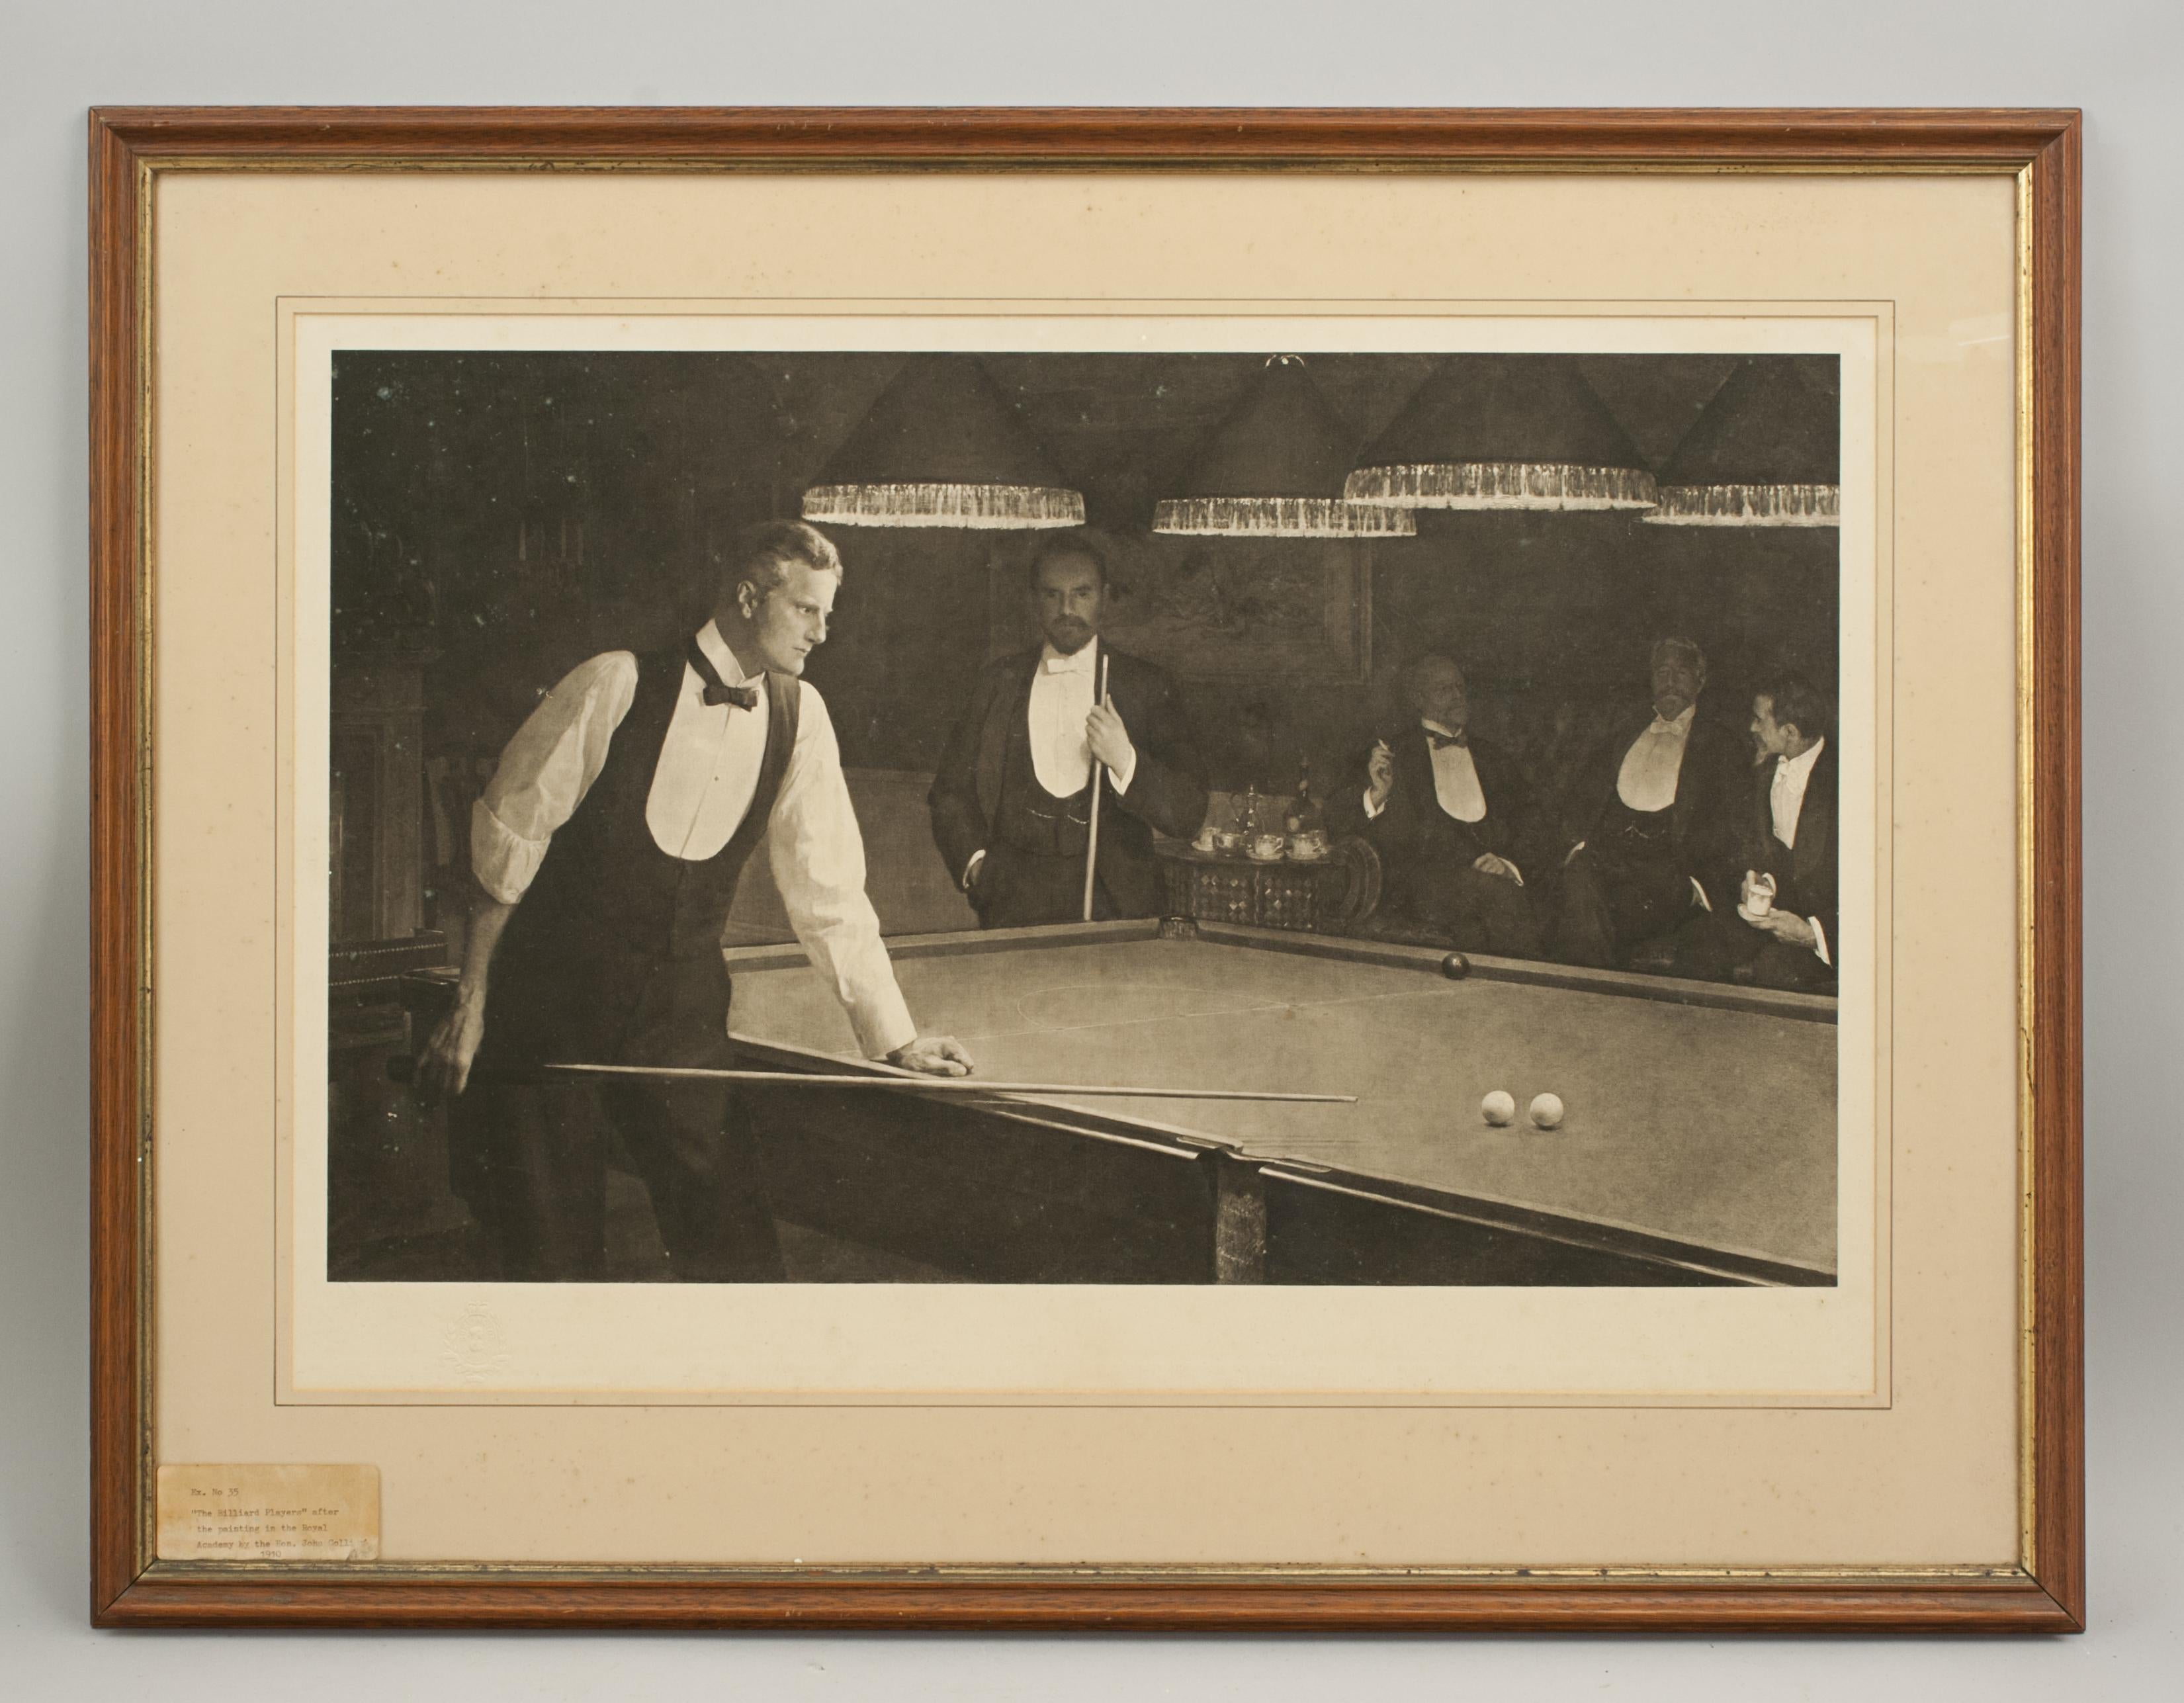 Billiard engraving, The Billiard Players.
An atmospheric billiard engraving 'The Billiard Players' after the original painting in the Royal Academy by the Hon. John Collier (1850 - 1934), a prominent London artist. The image shows two gentlemen